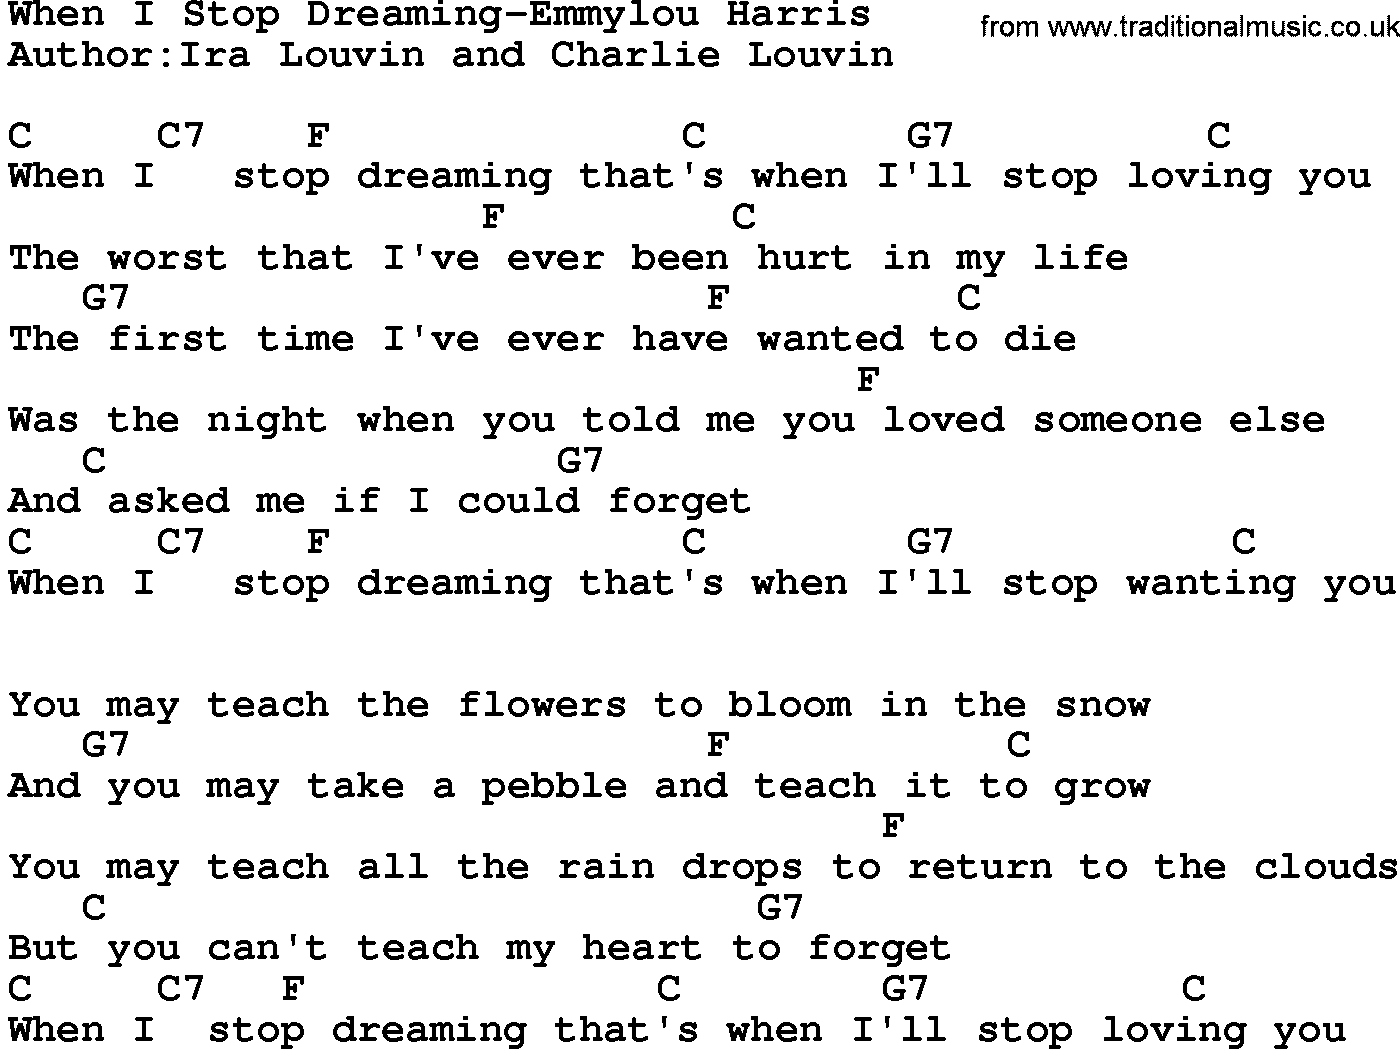 Country music song: When I Stop Dreaming-Emmylou Harris  lyrics and chords